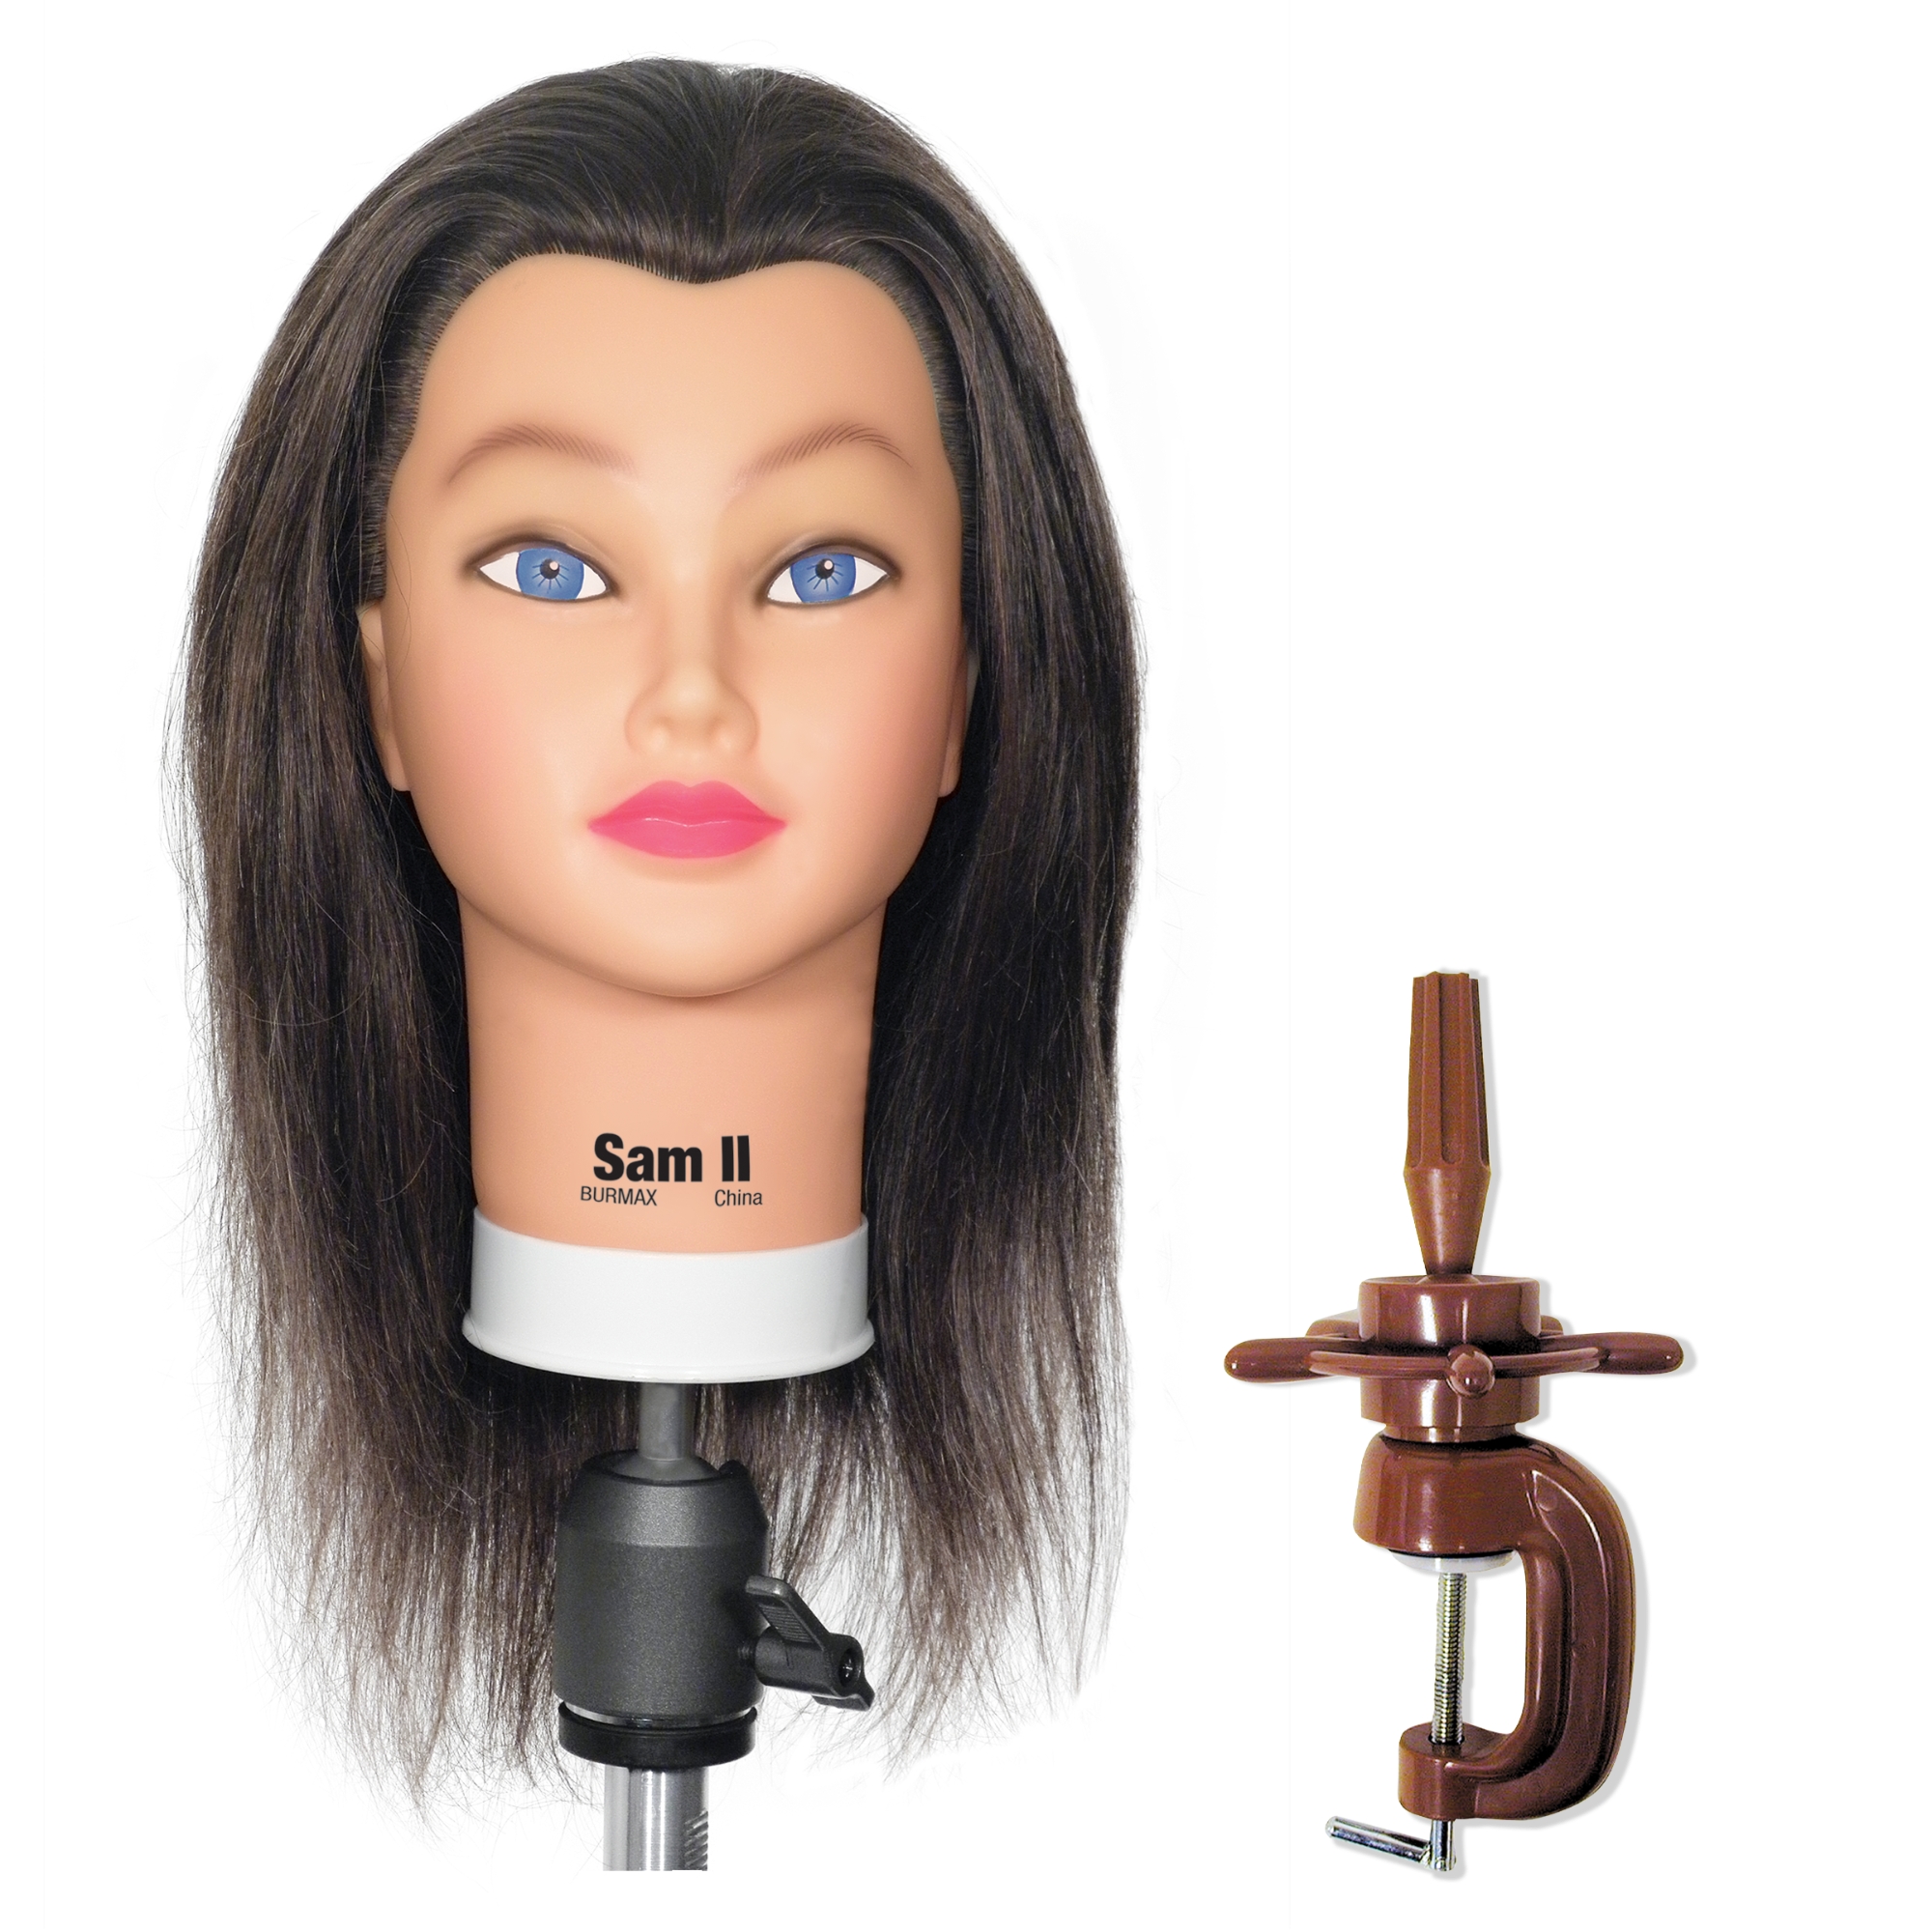 Cosmetology Mannequin Head - Emily Junior – Simply Manikins